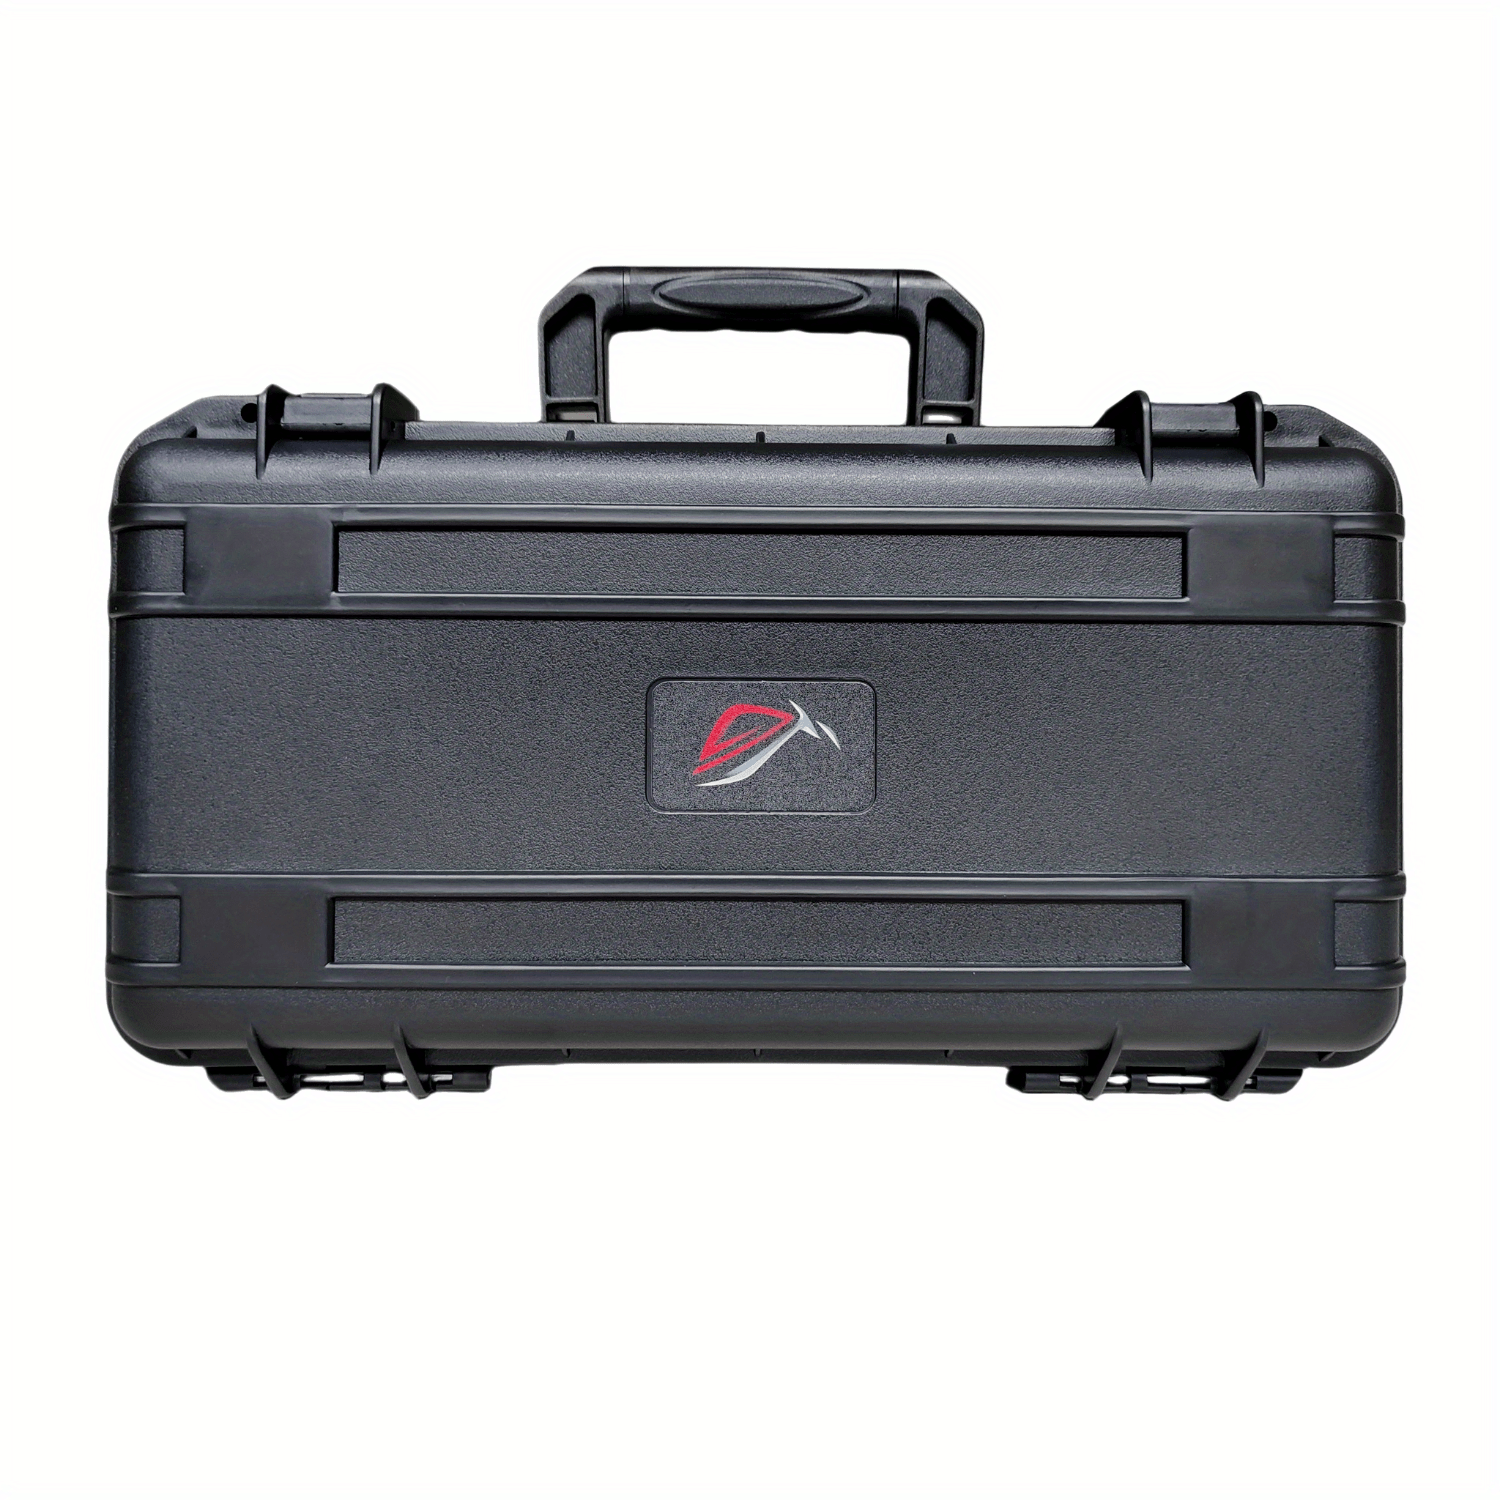 Asus ROG Ally Travel Case - Is it worth it? (Storage, Protection